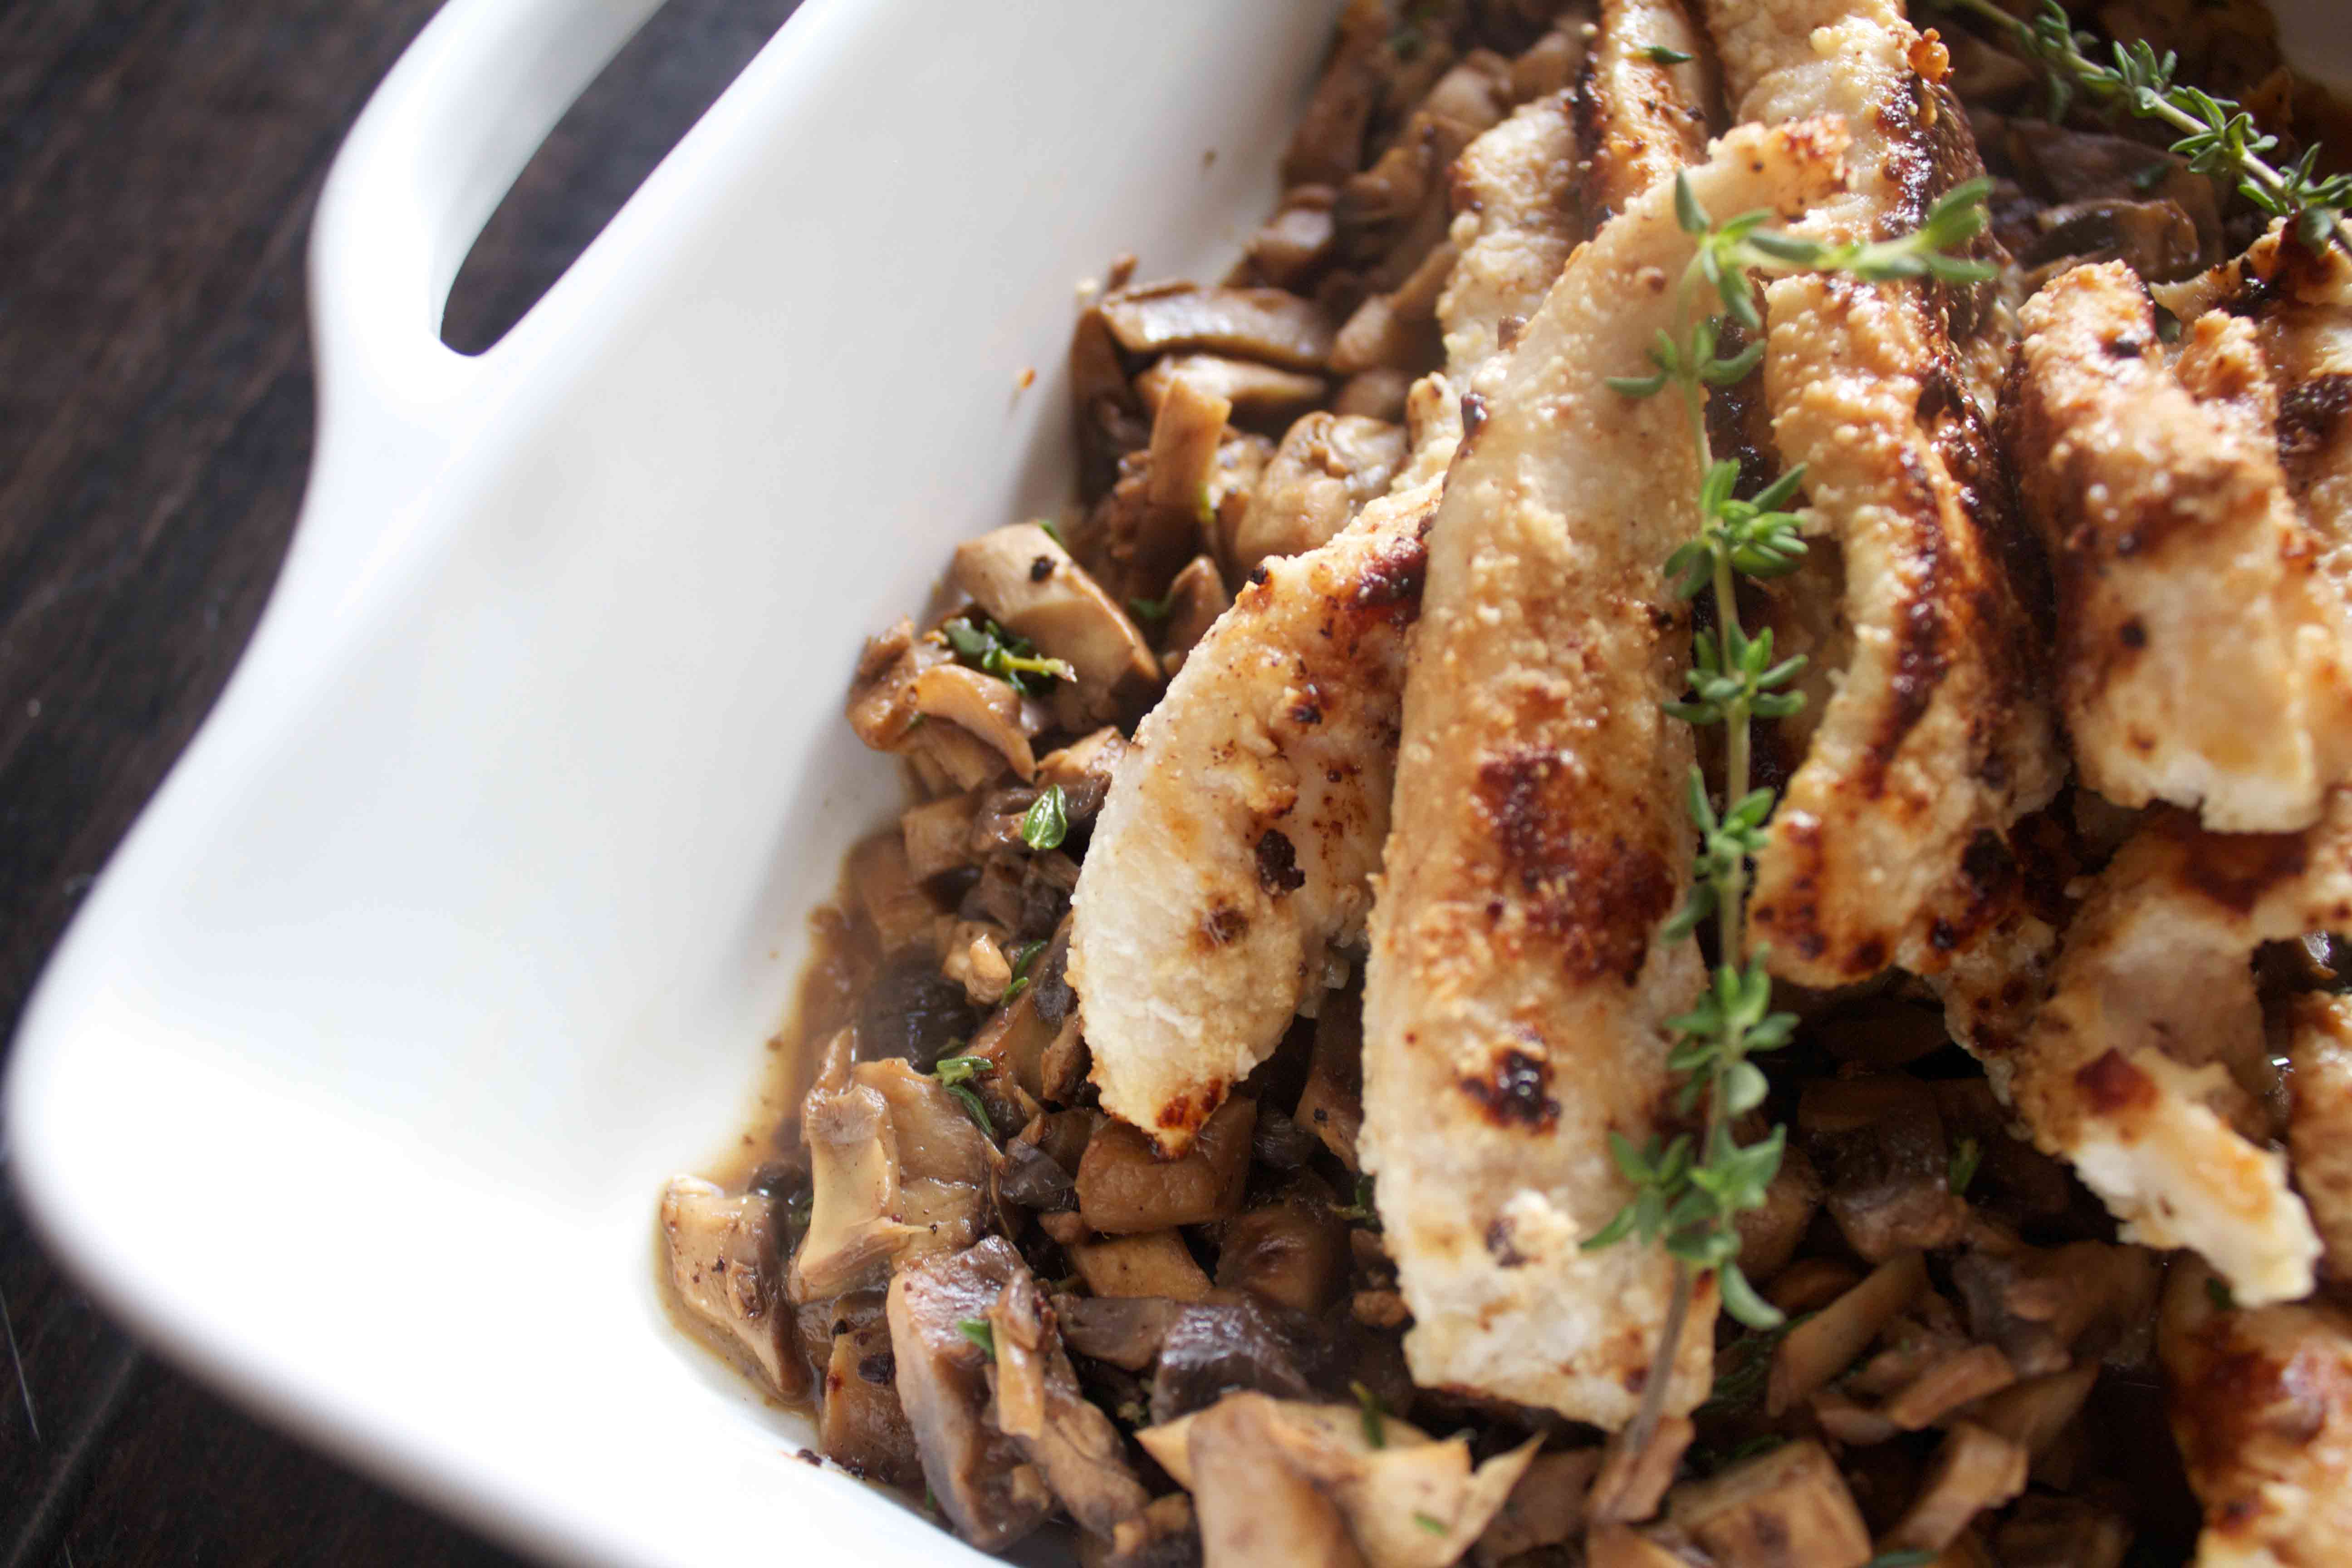 Parmesan Thyme Chicken with Mushroom